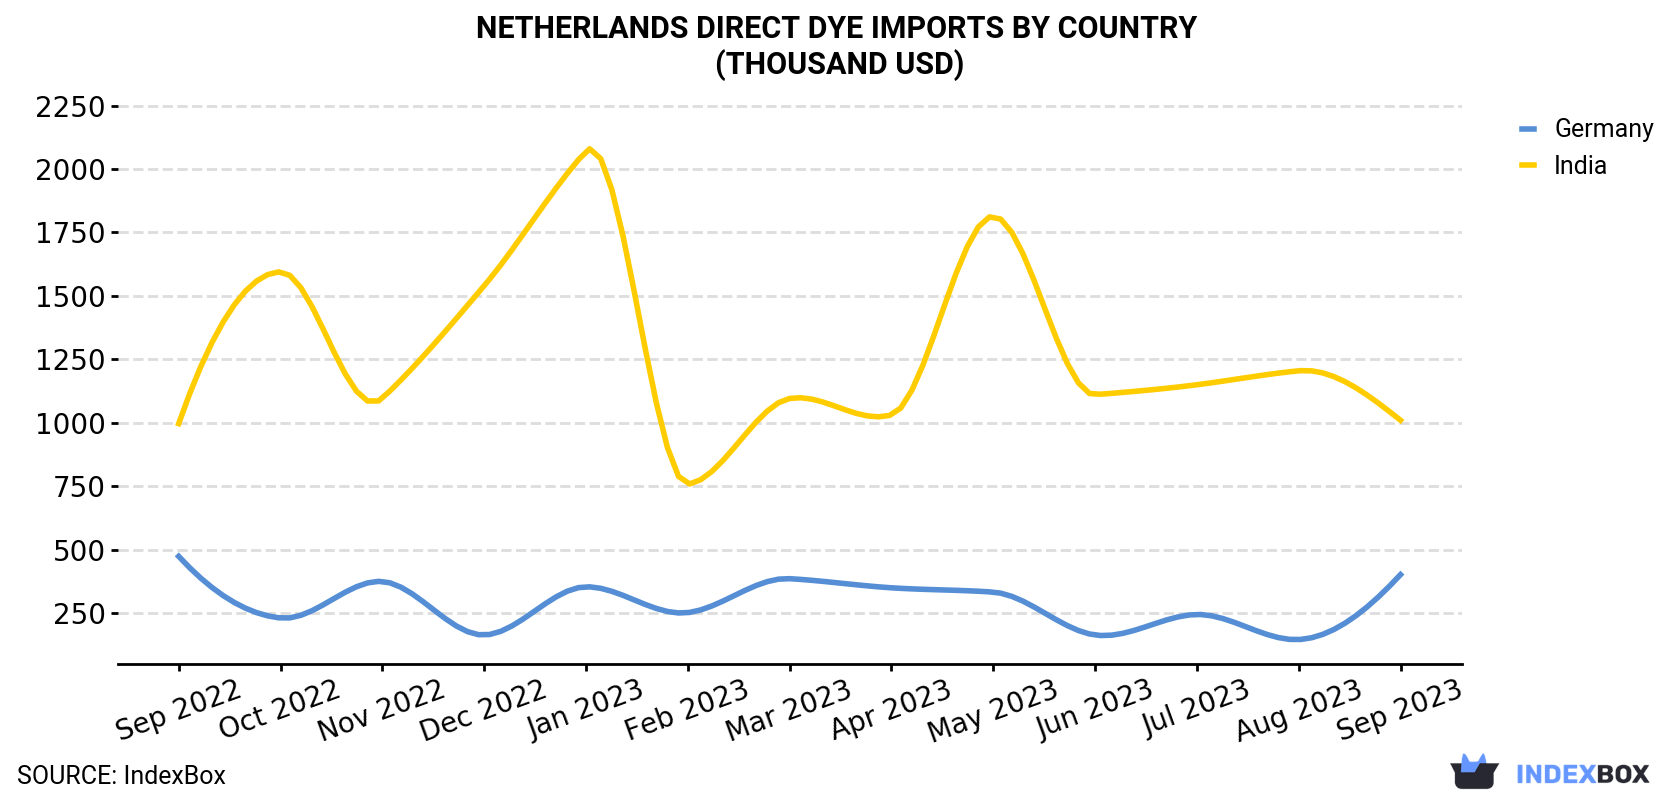 Netherlands Direct Dye Imports By Country (Thousand USD)